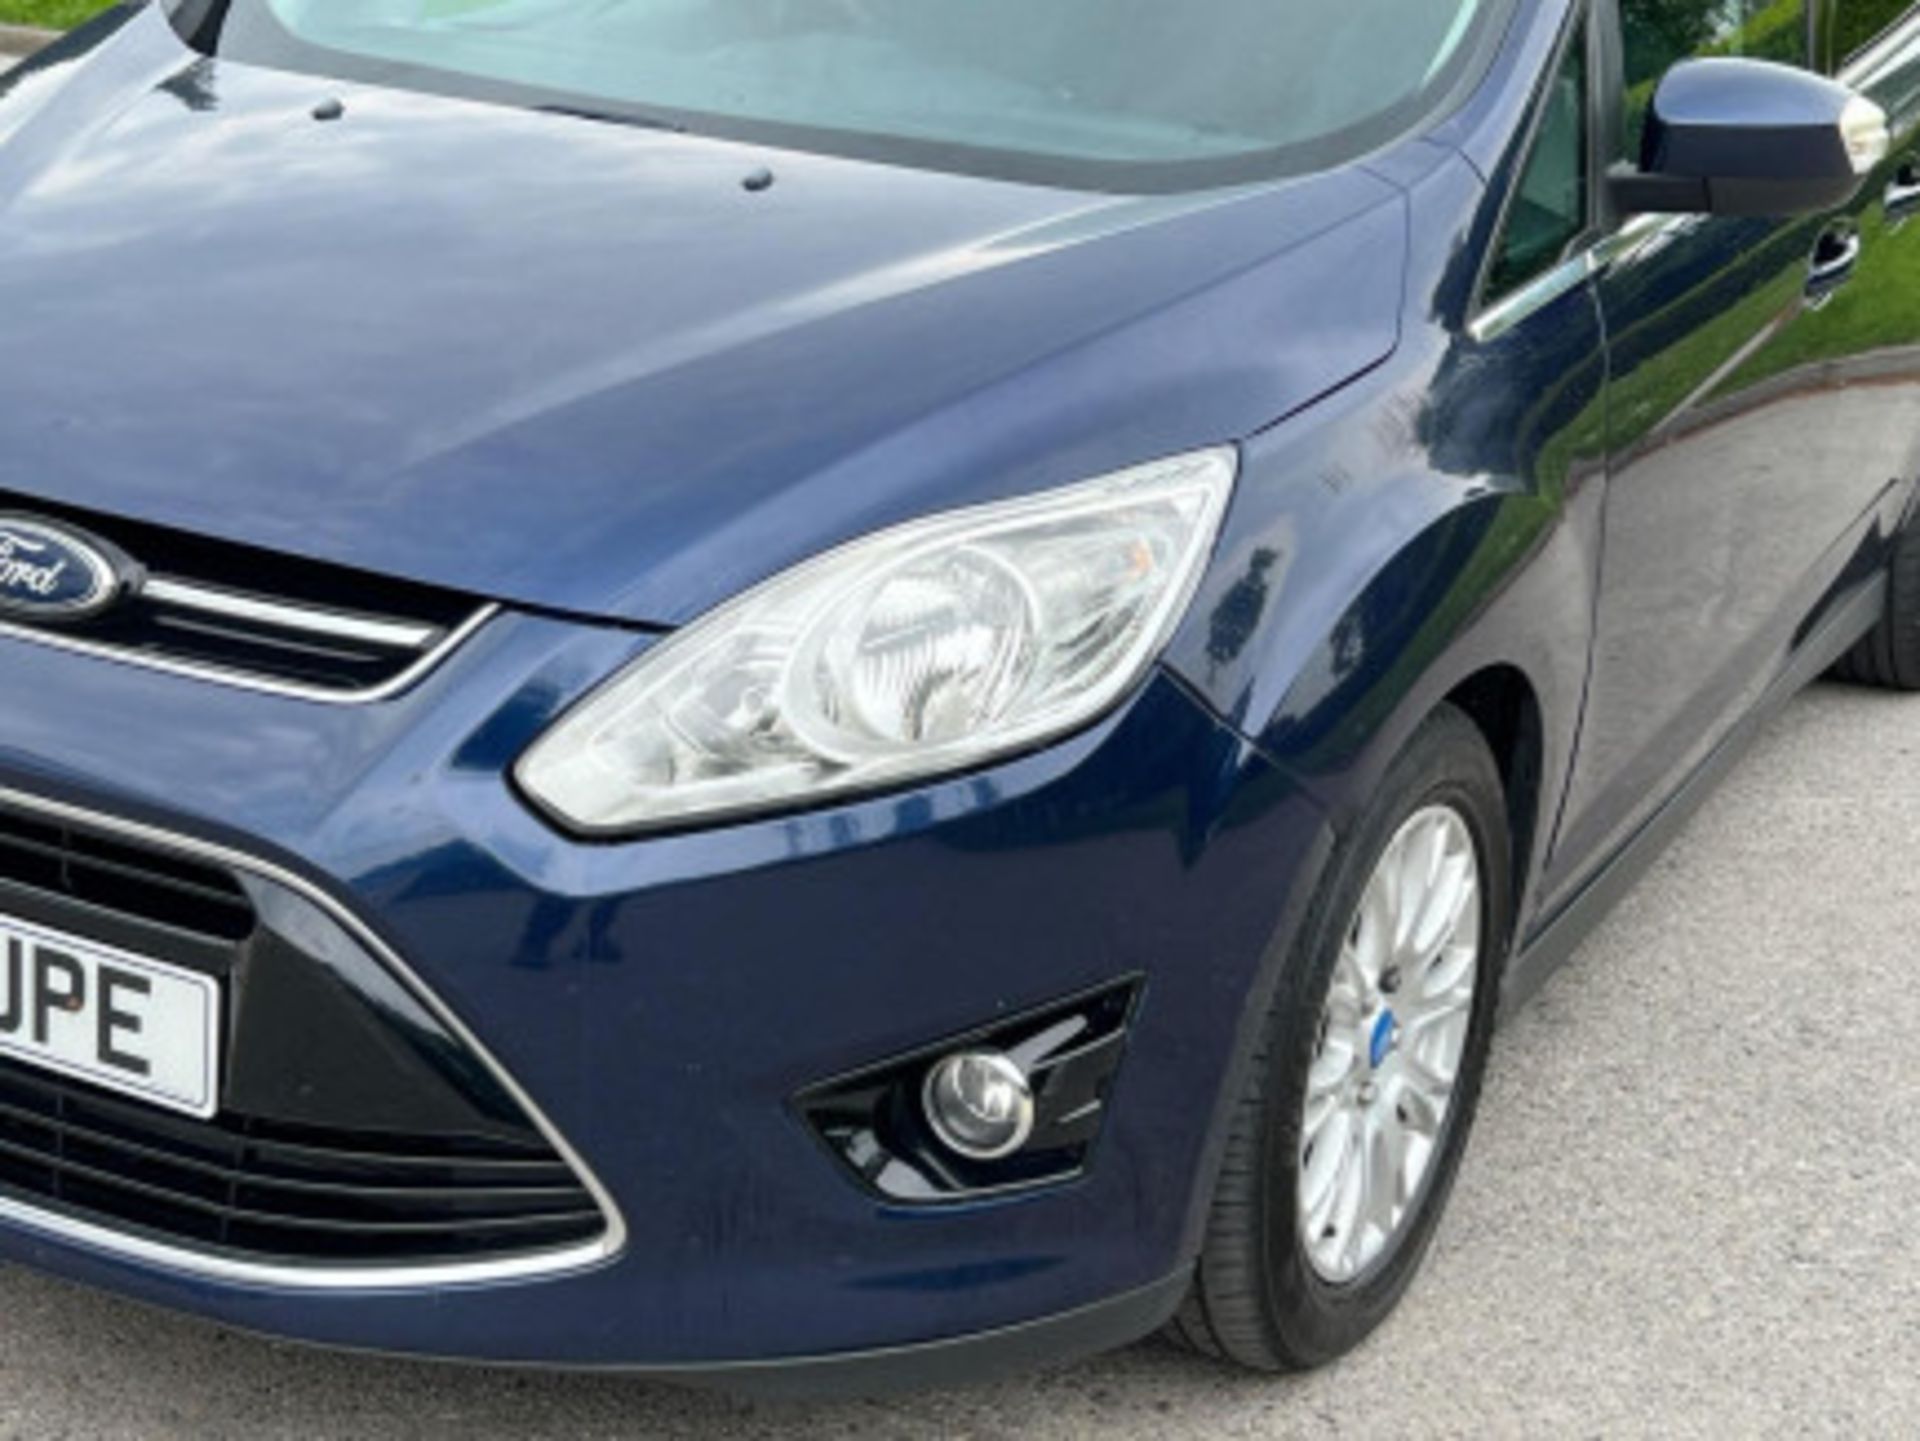 STYLISH AND SPACIOUS 2011 FORD GRAND C-MAX 1.6 TDCI >>--NO VAT ON HAMMER--<< - Image 61 of 136